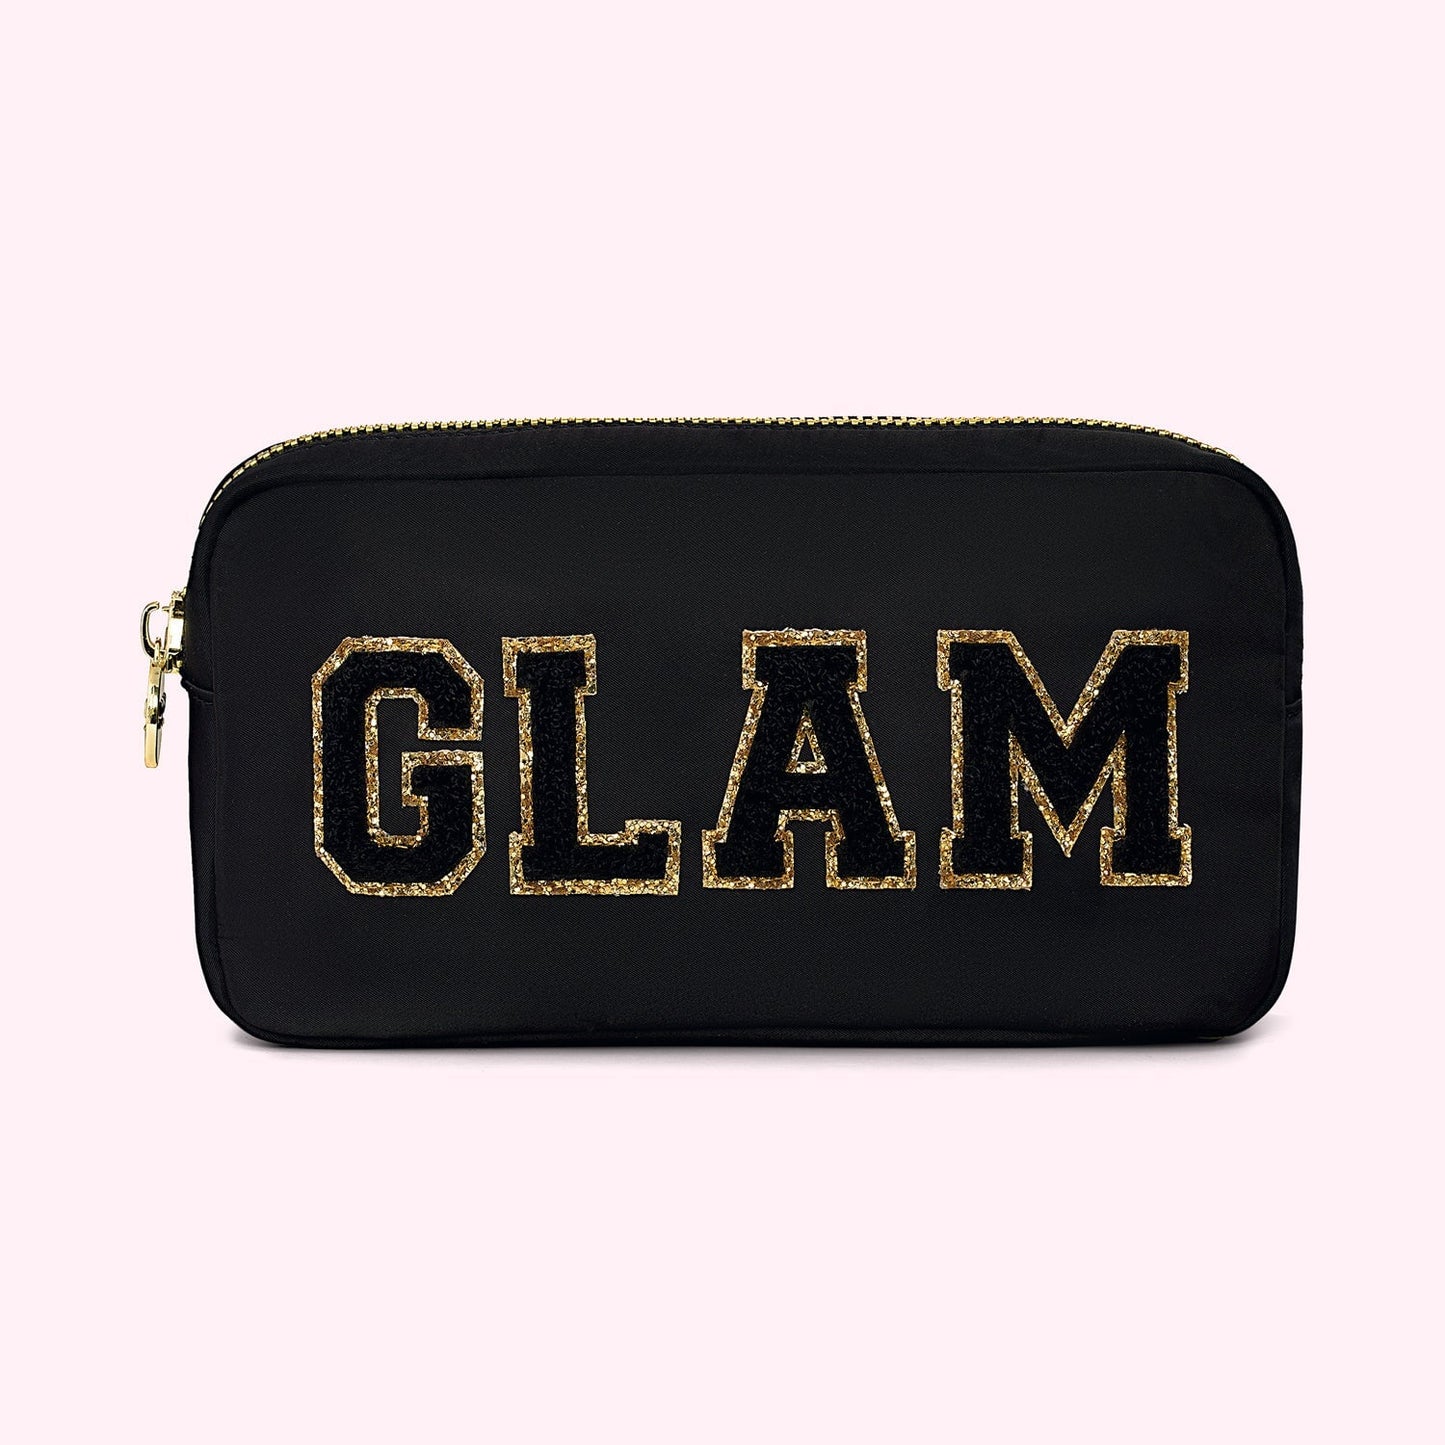 Stoney Clover Lane Small Pouch | Black | One Size | Shopbop